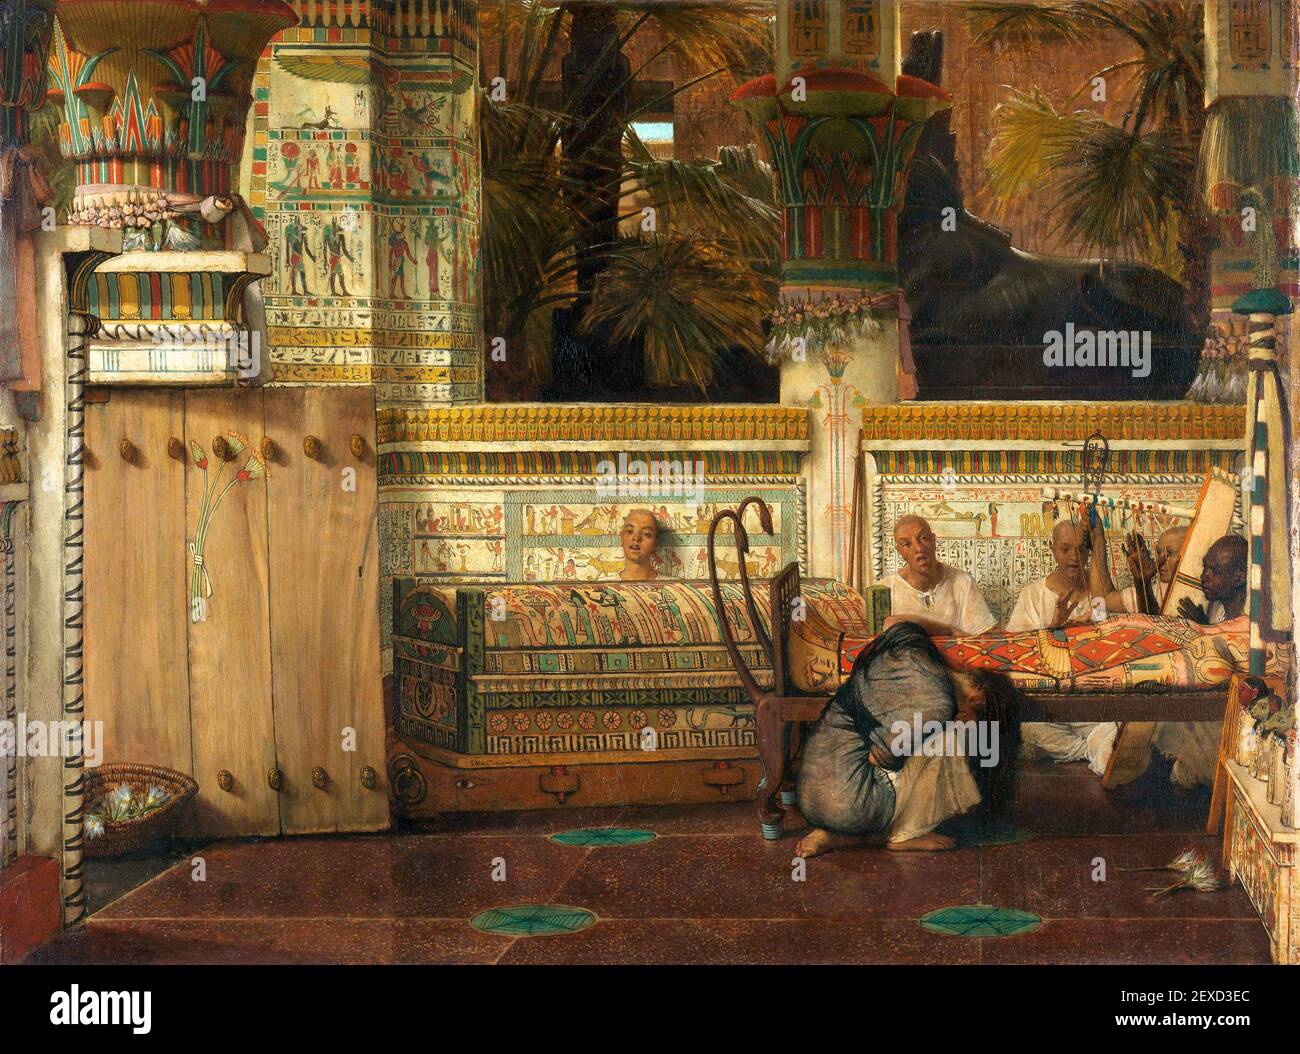 Lawrence Alma-Tadema. Painting entitled 'The Egyptain Widow' by the British-Dutch artist, Sir Lawrence Alma-Tadema (b. Lourens Alma Tadema, 1836-1912), oil on panel, 1872 Stock Photo